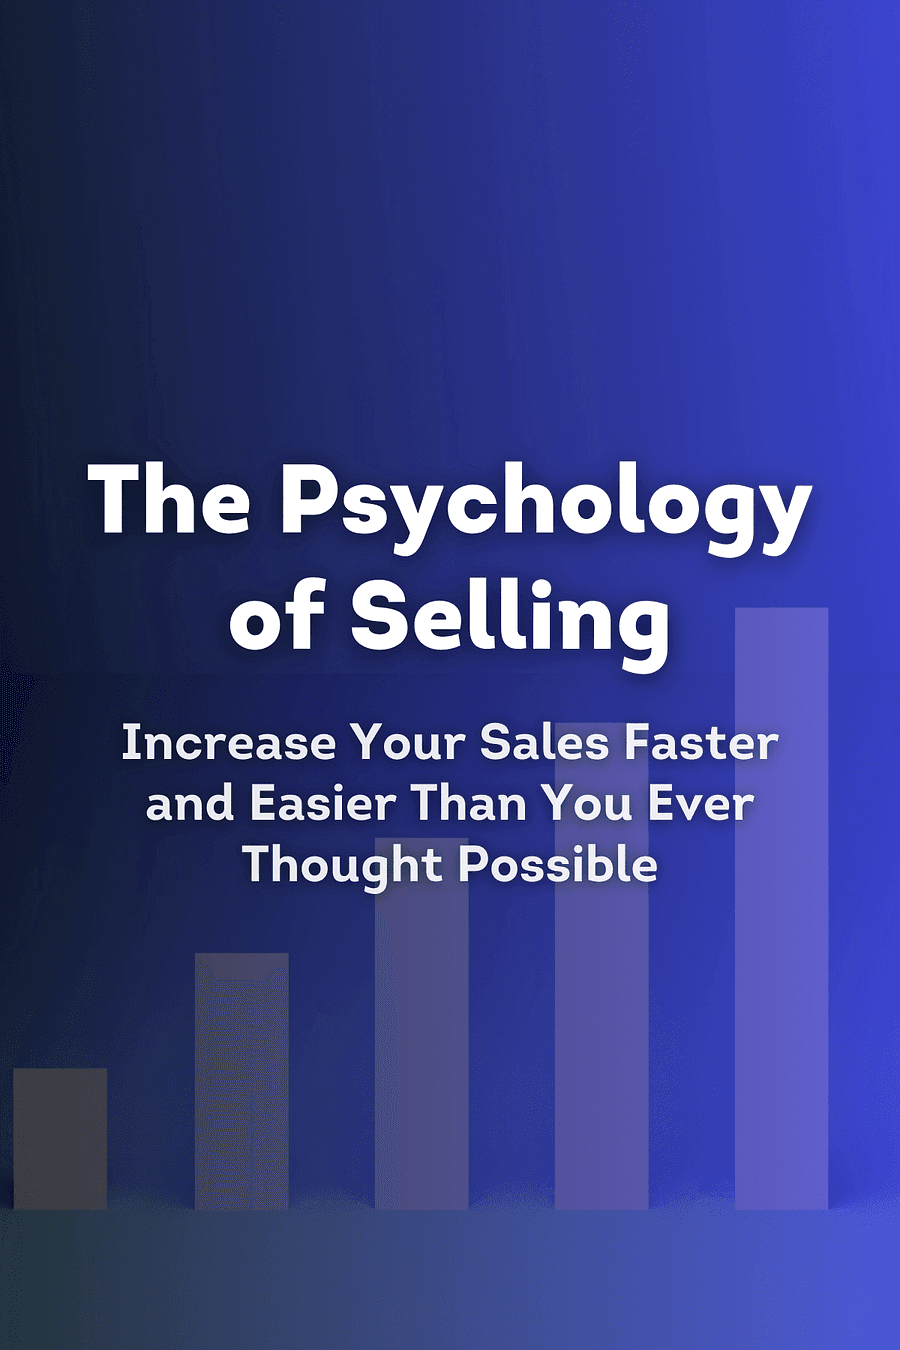 The Psychology of Selling by Brian Tracy - Book Summary